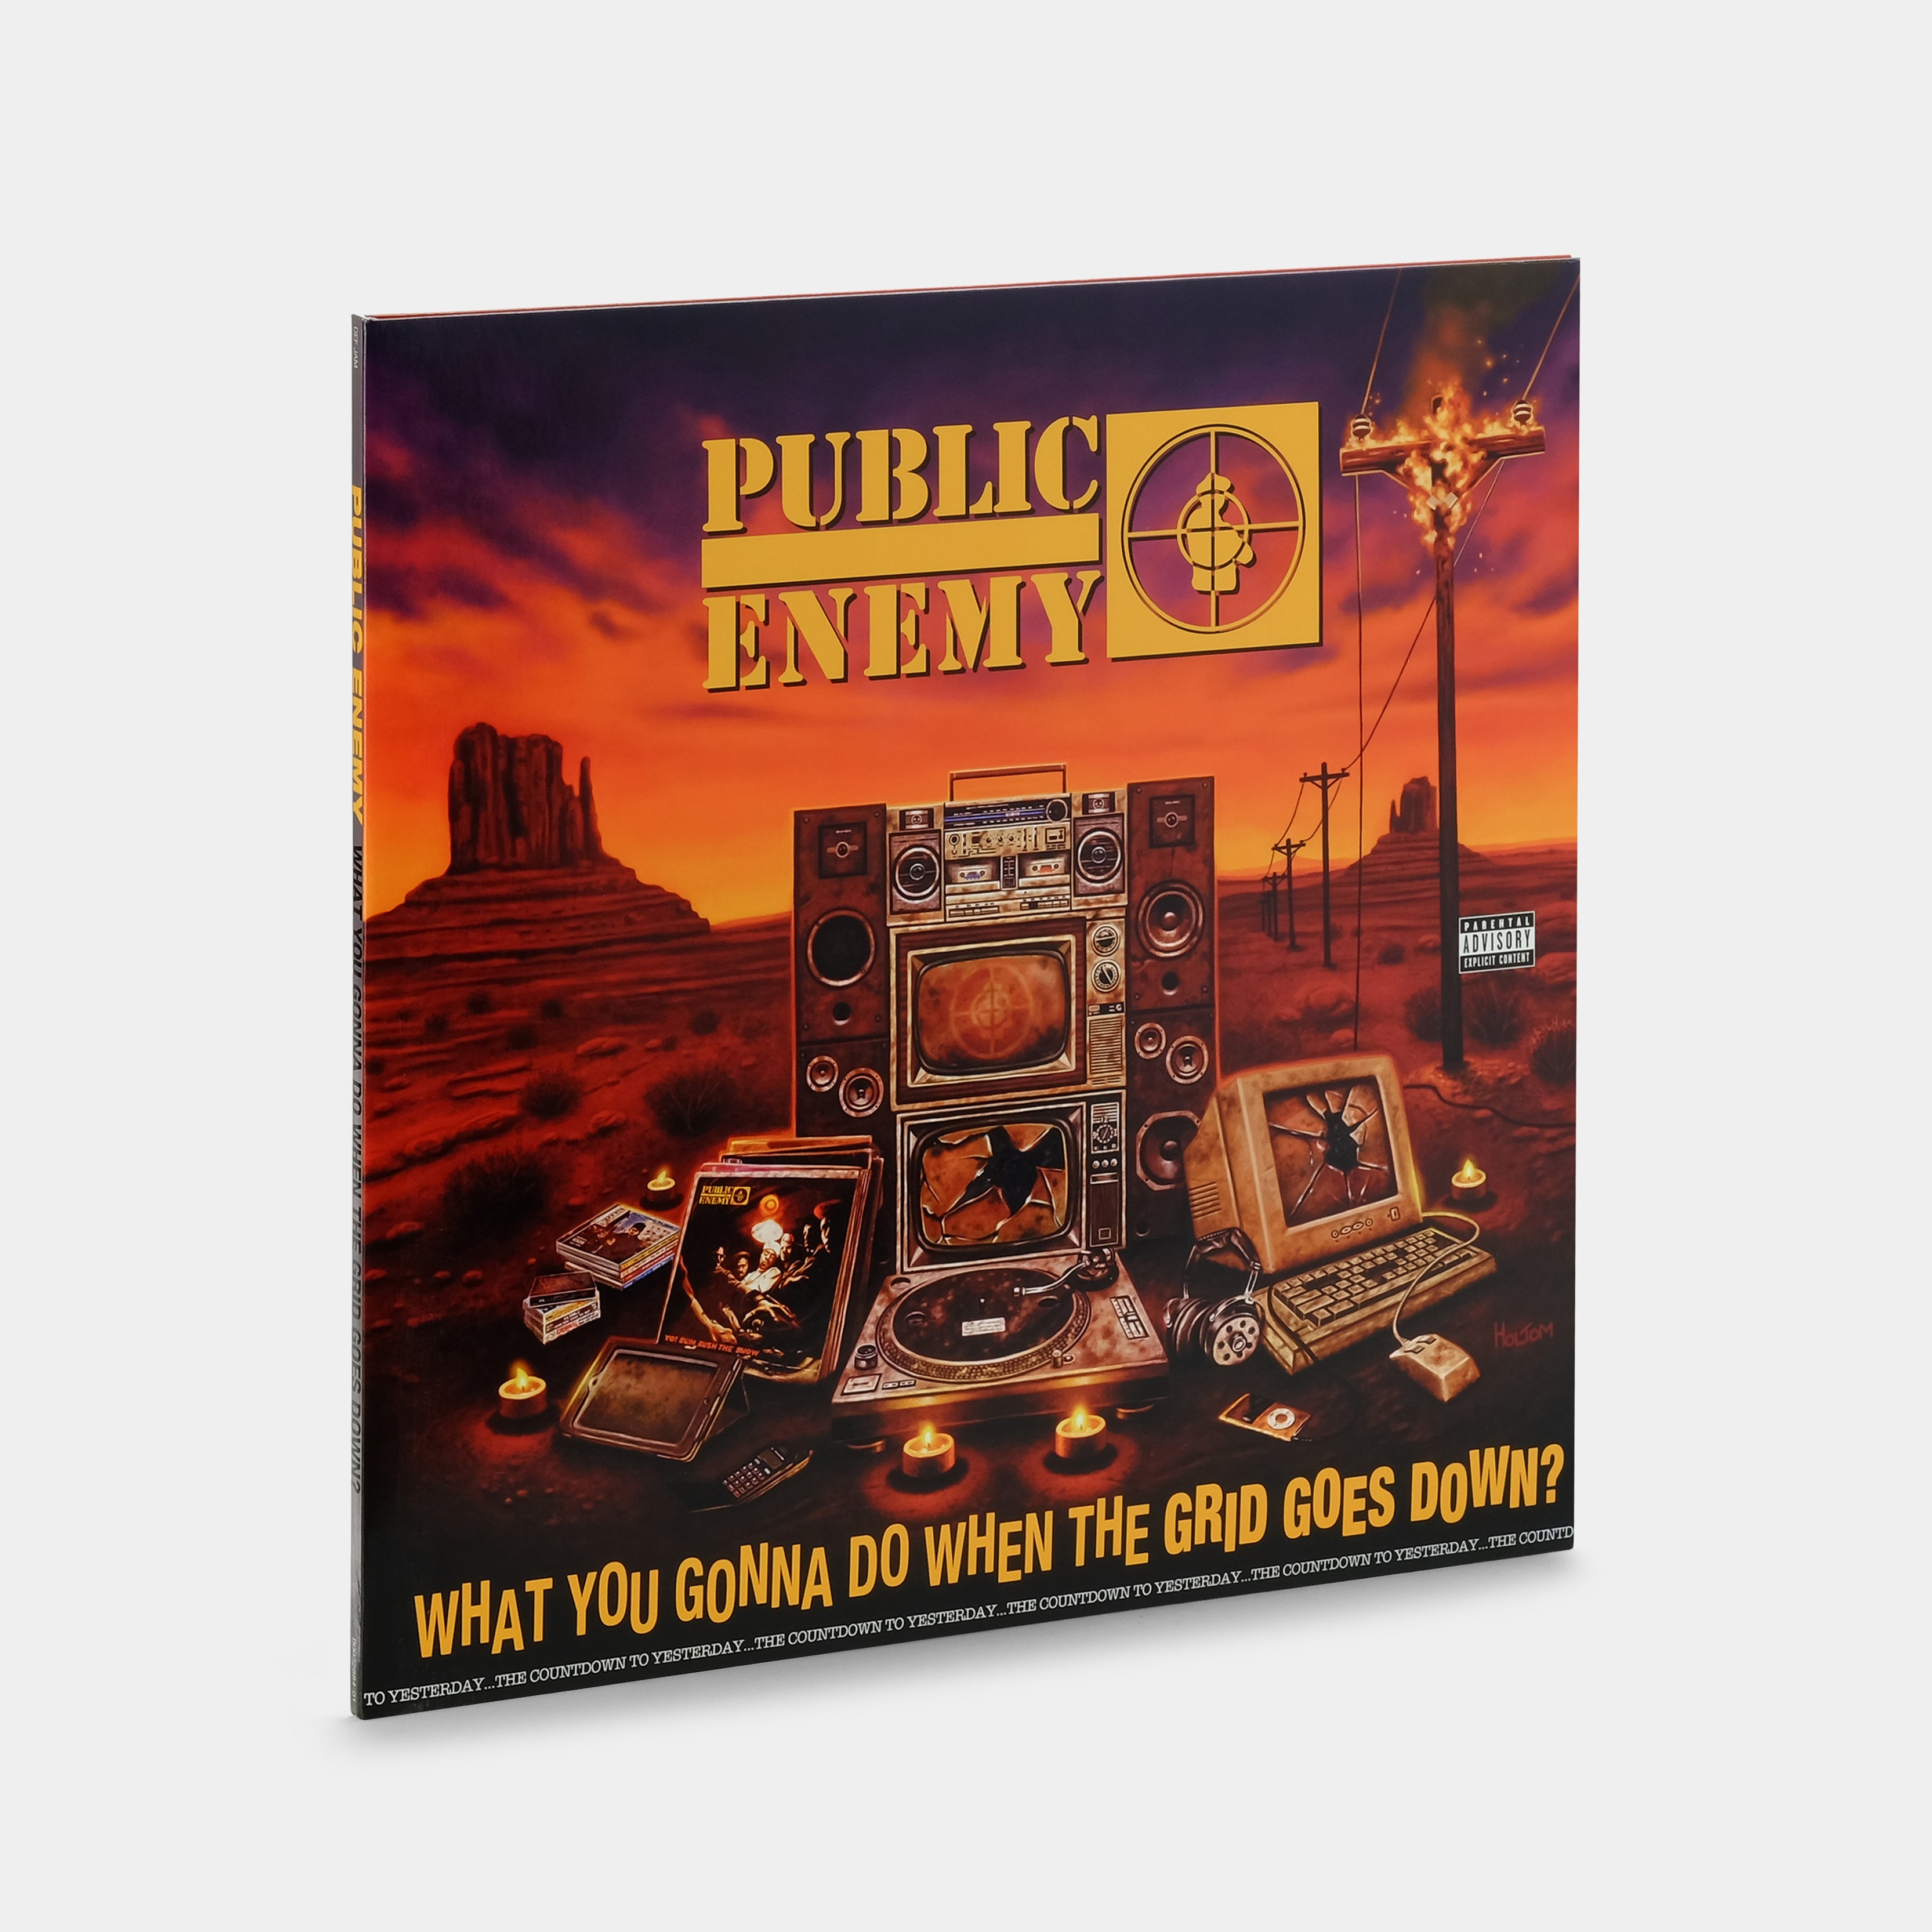 Public Enemy - What You Gonna Do When The Grid Goes Down? LP Vinyl Record